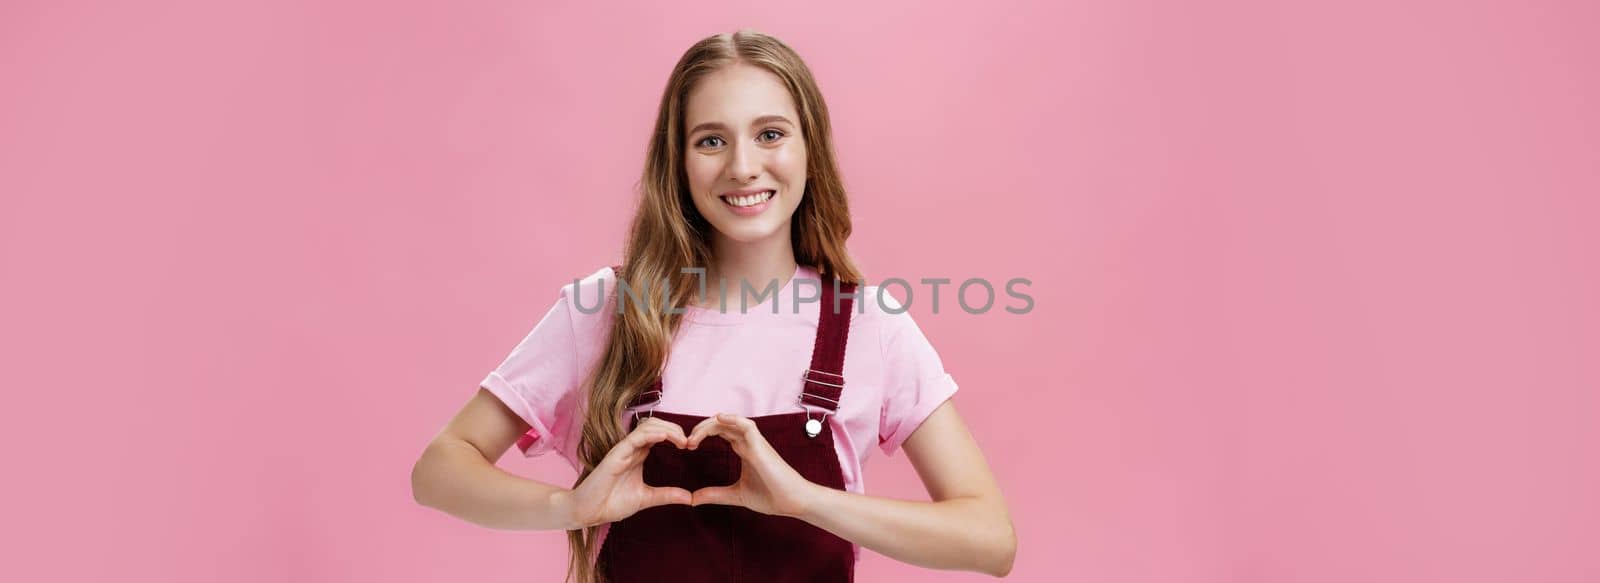 Girl loves family. Kind charming young woman in overalls with small tattoo on arm showing heart gesture over body and smiling lovely at camera expressing tender and cute attitude over pink wall.